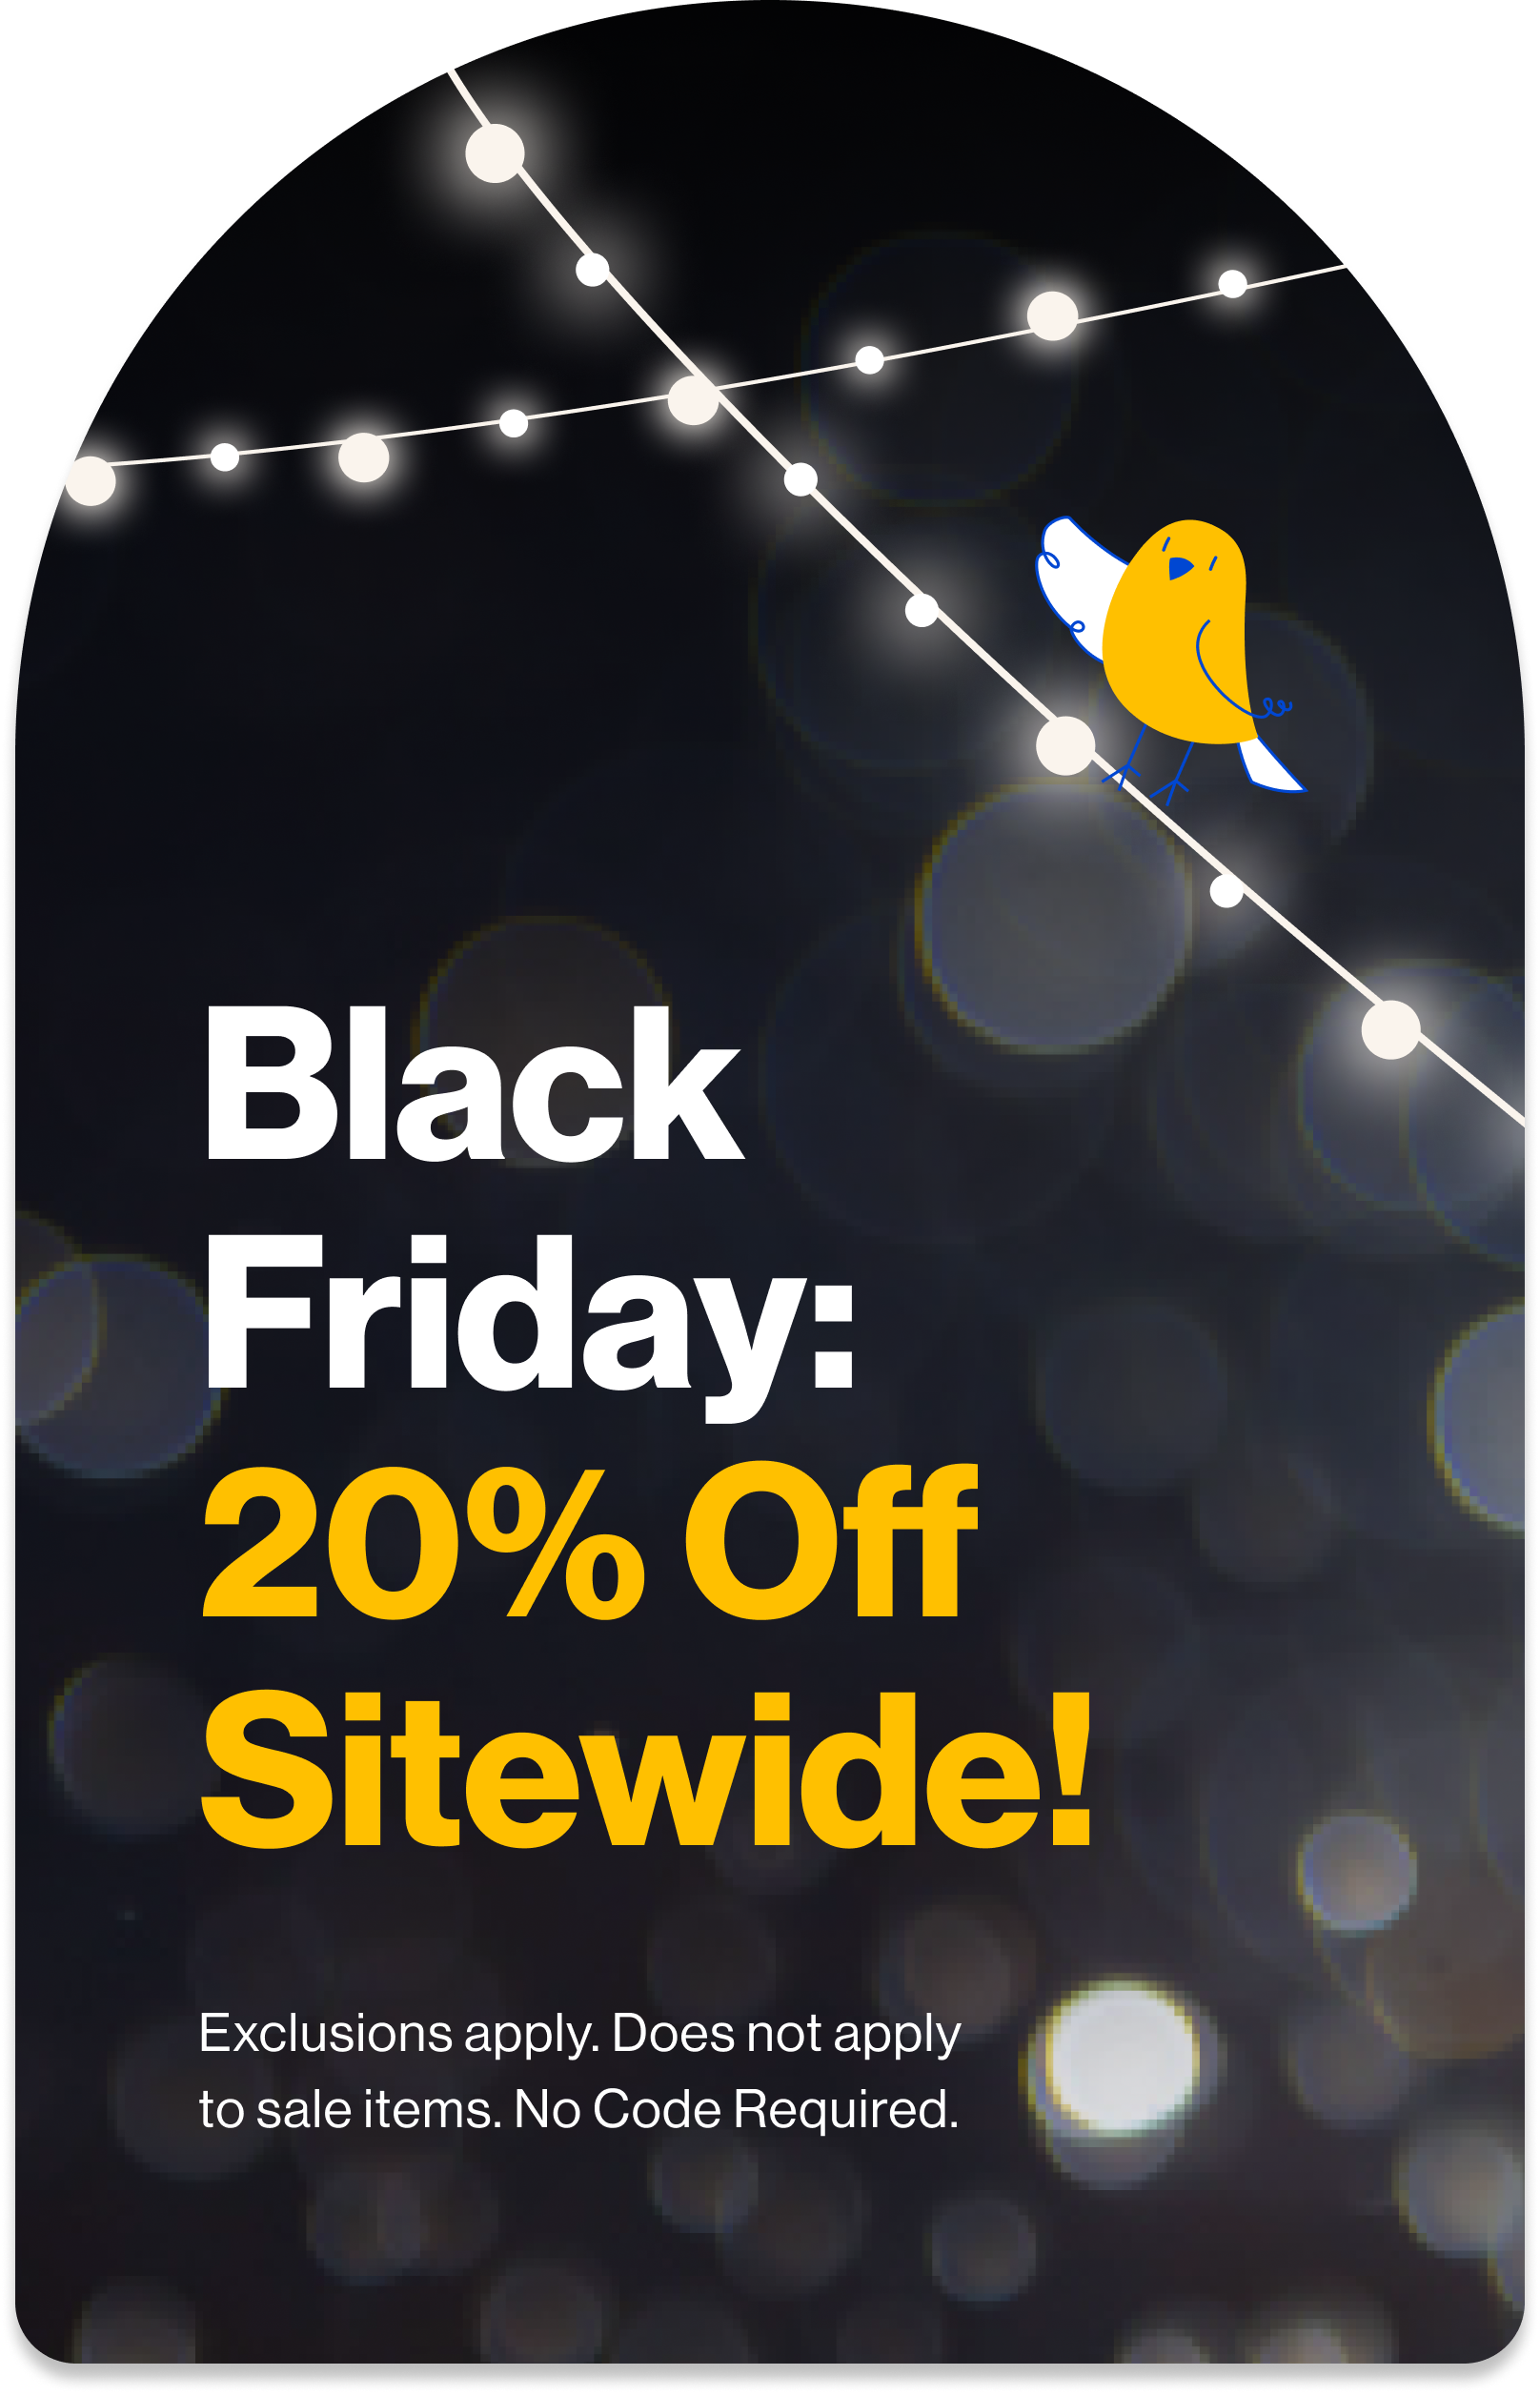 Black Friday: 20% Off Sitewide! Exclusions apply. Does not apply to sale items. No Code Required.